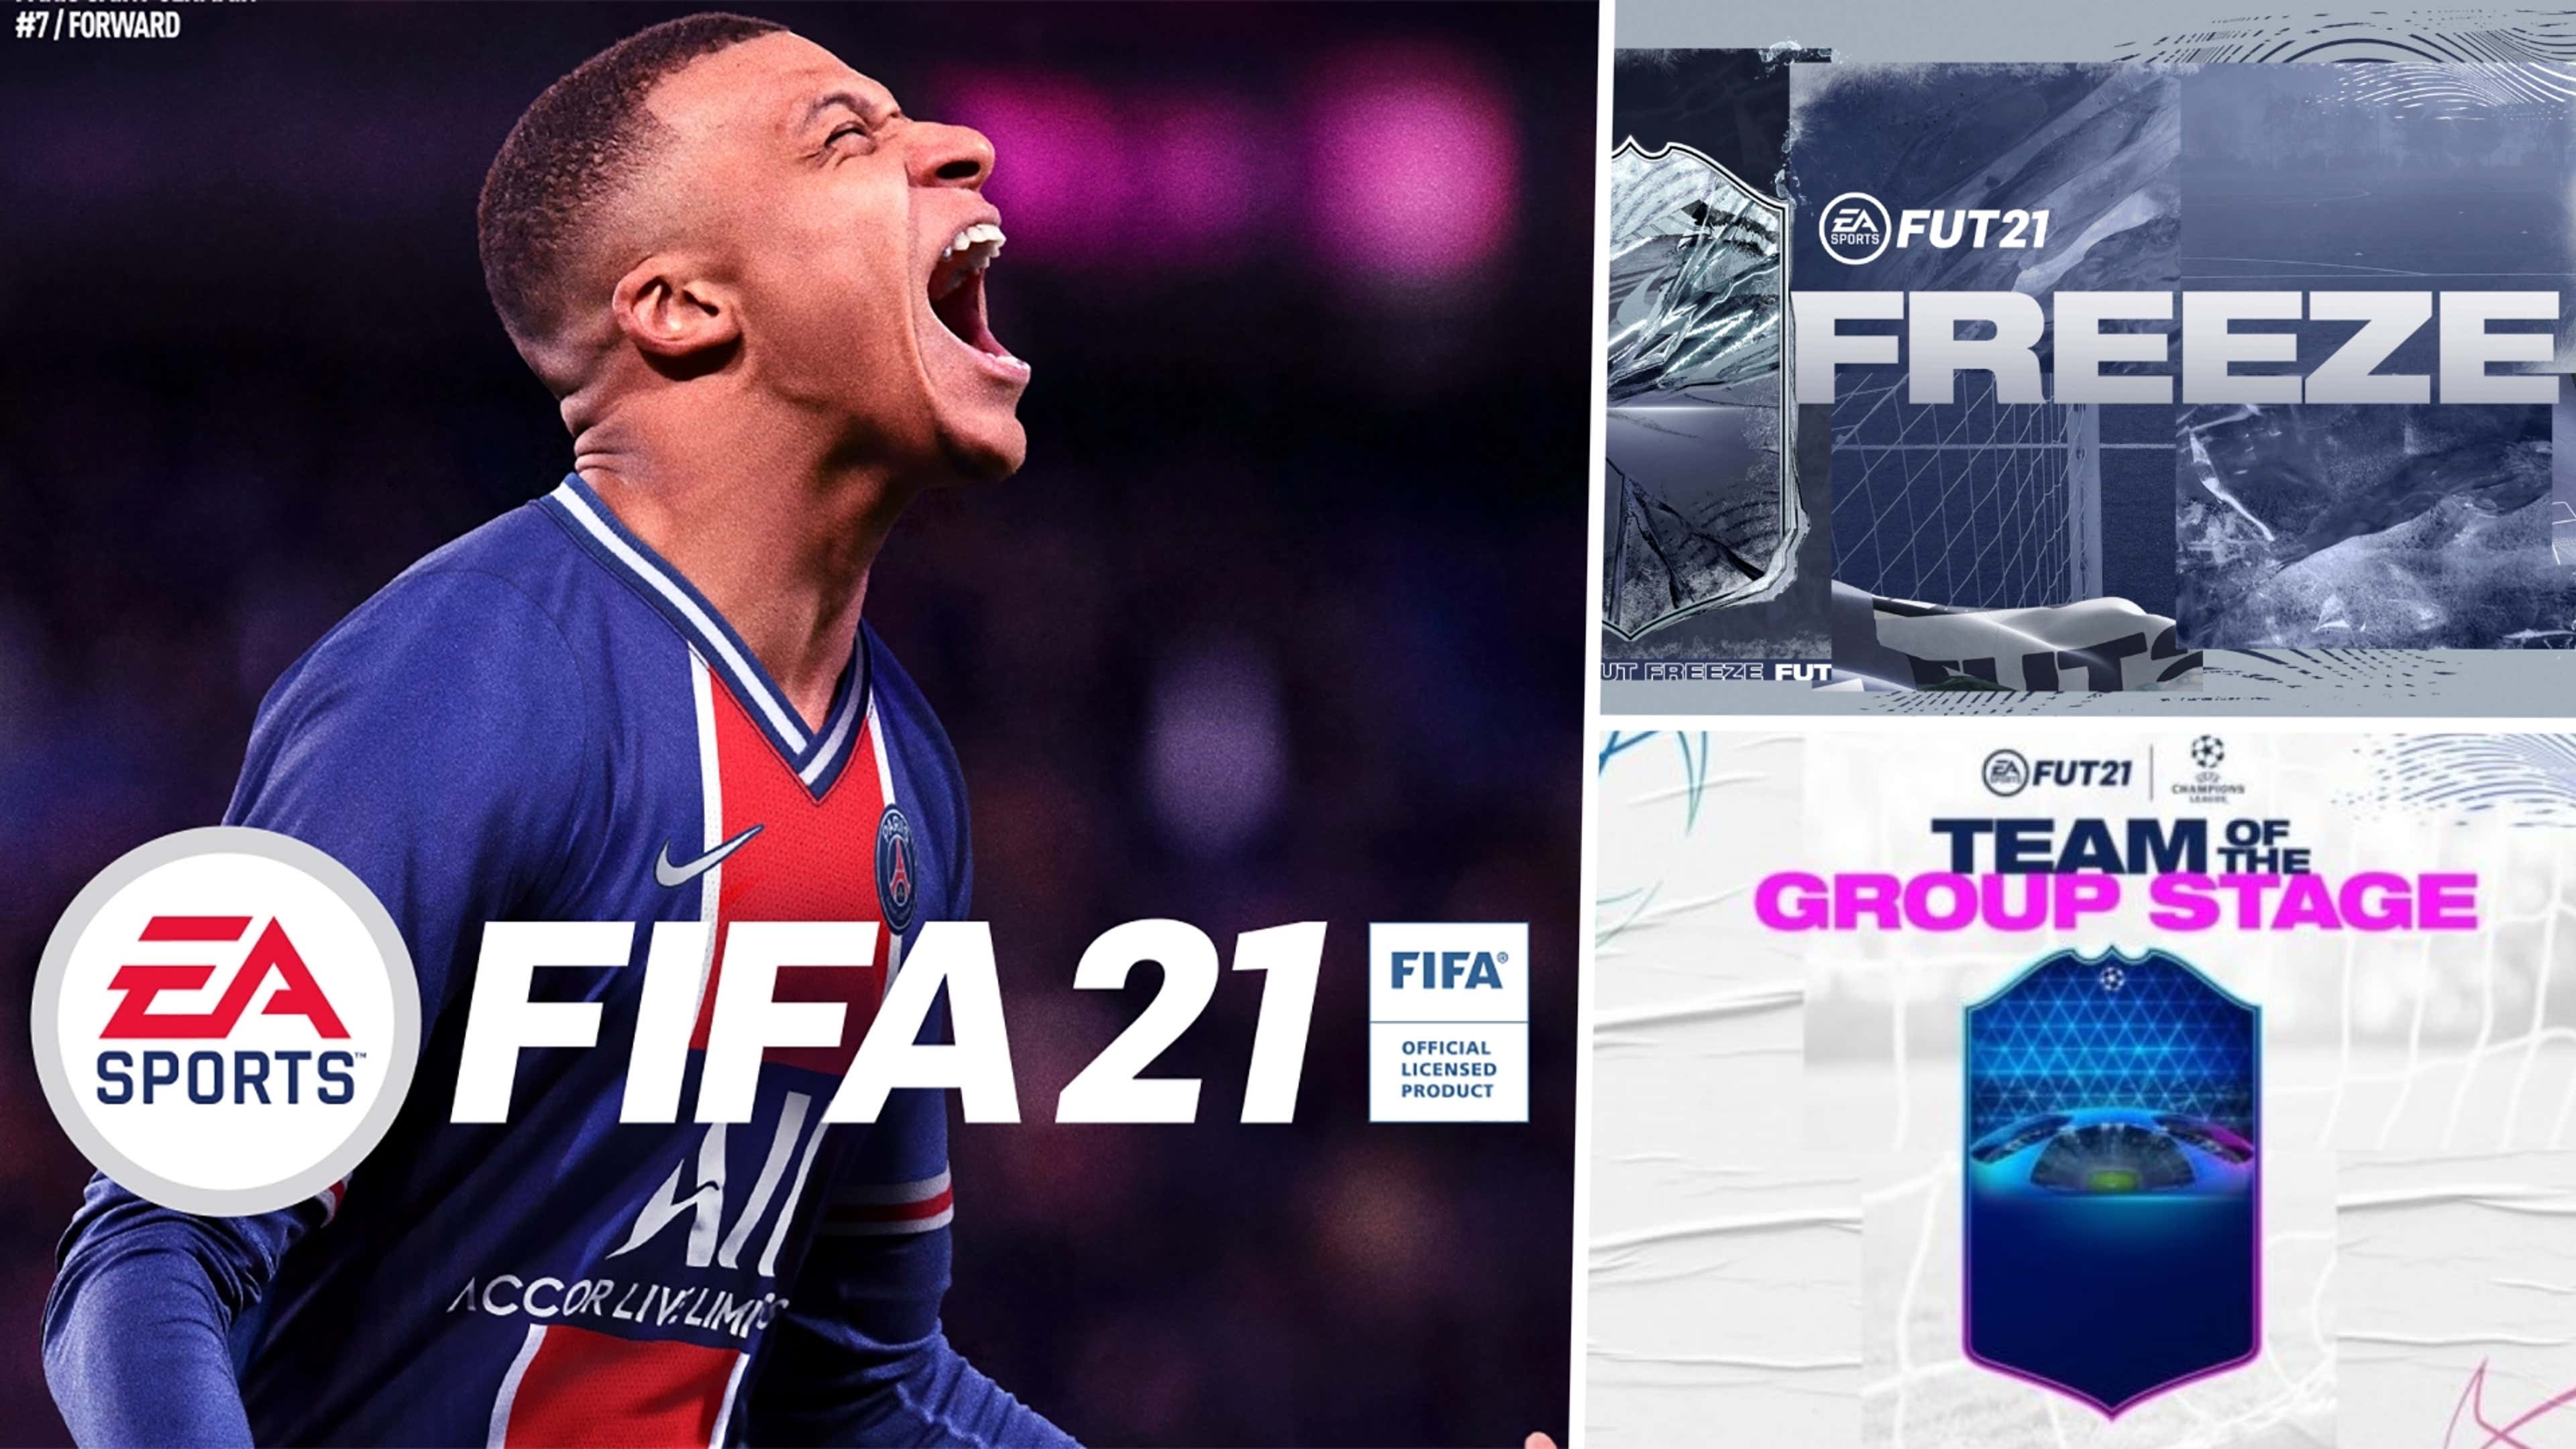 FIFA 21: Champions League Team of the Group Stage release date